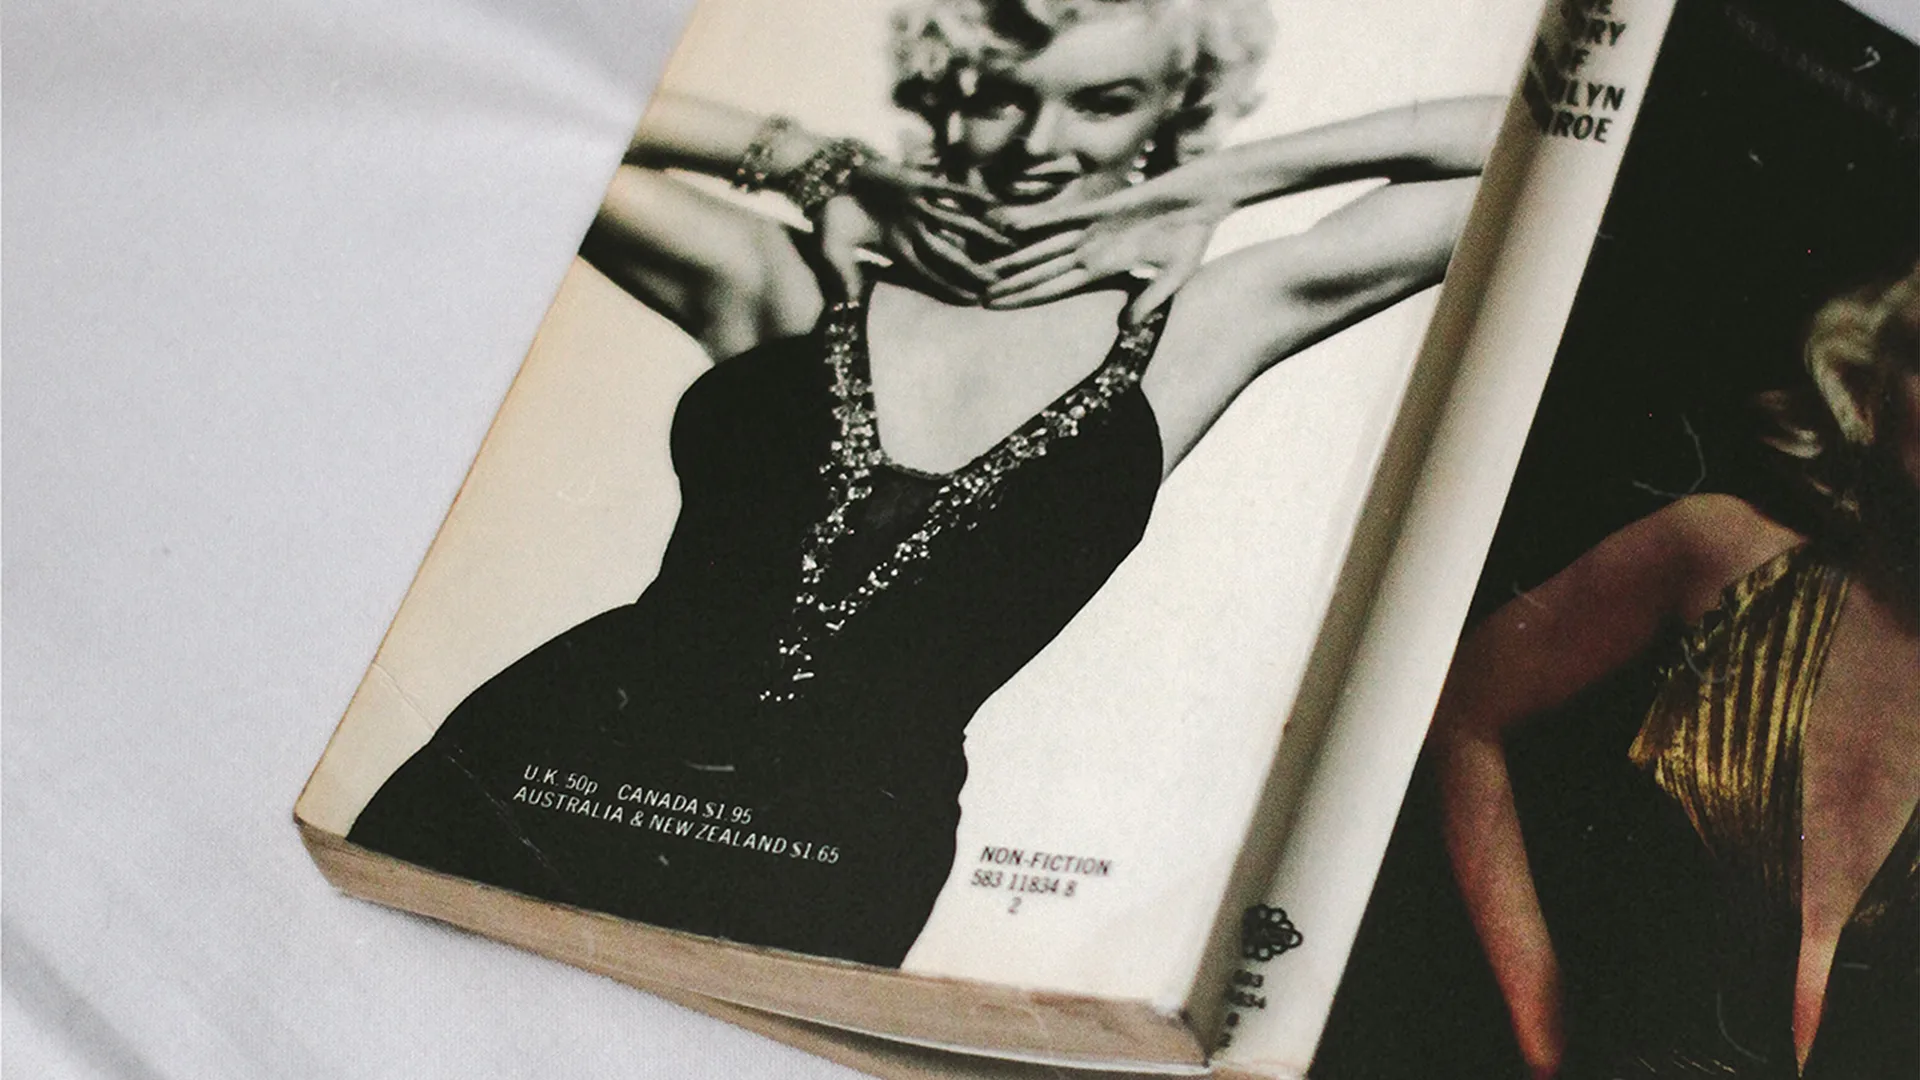 A book with Marylin Monroe on the cover